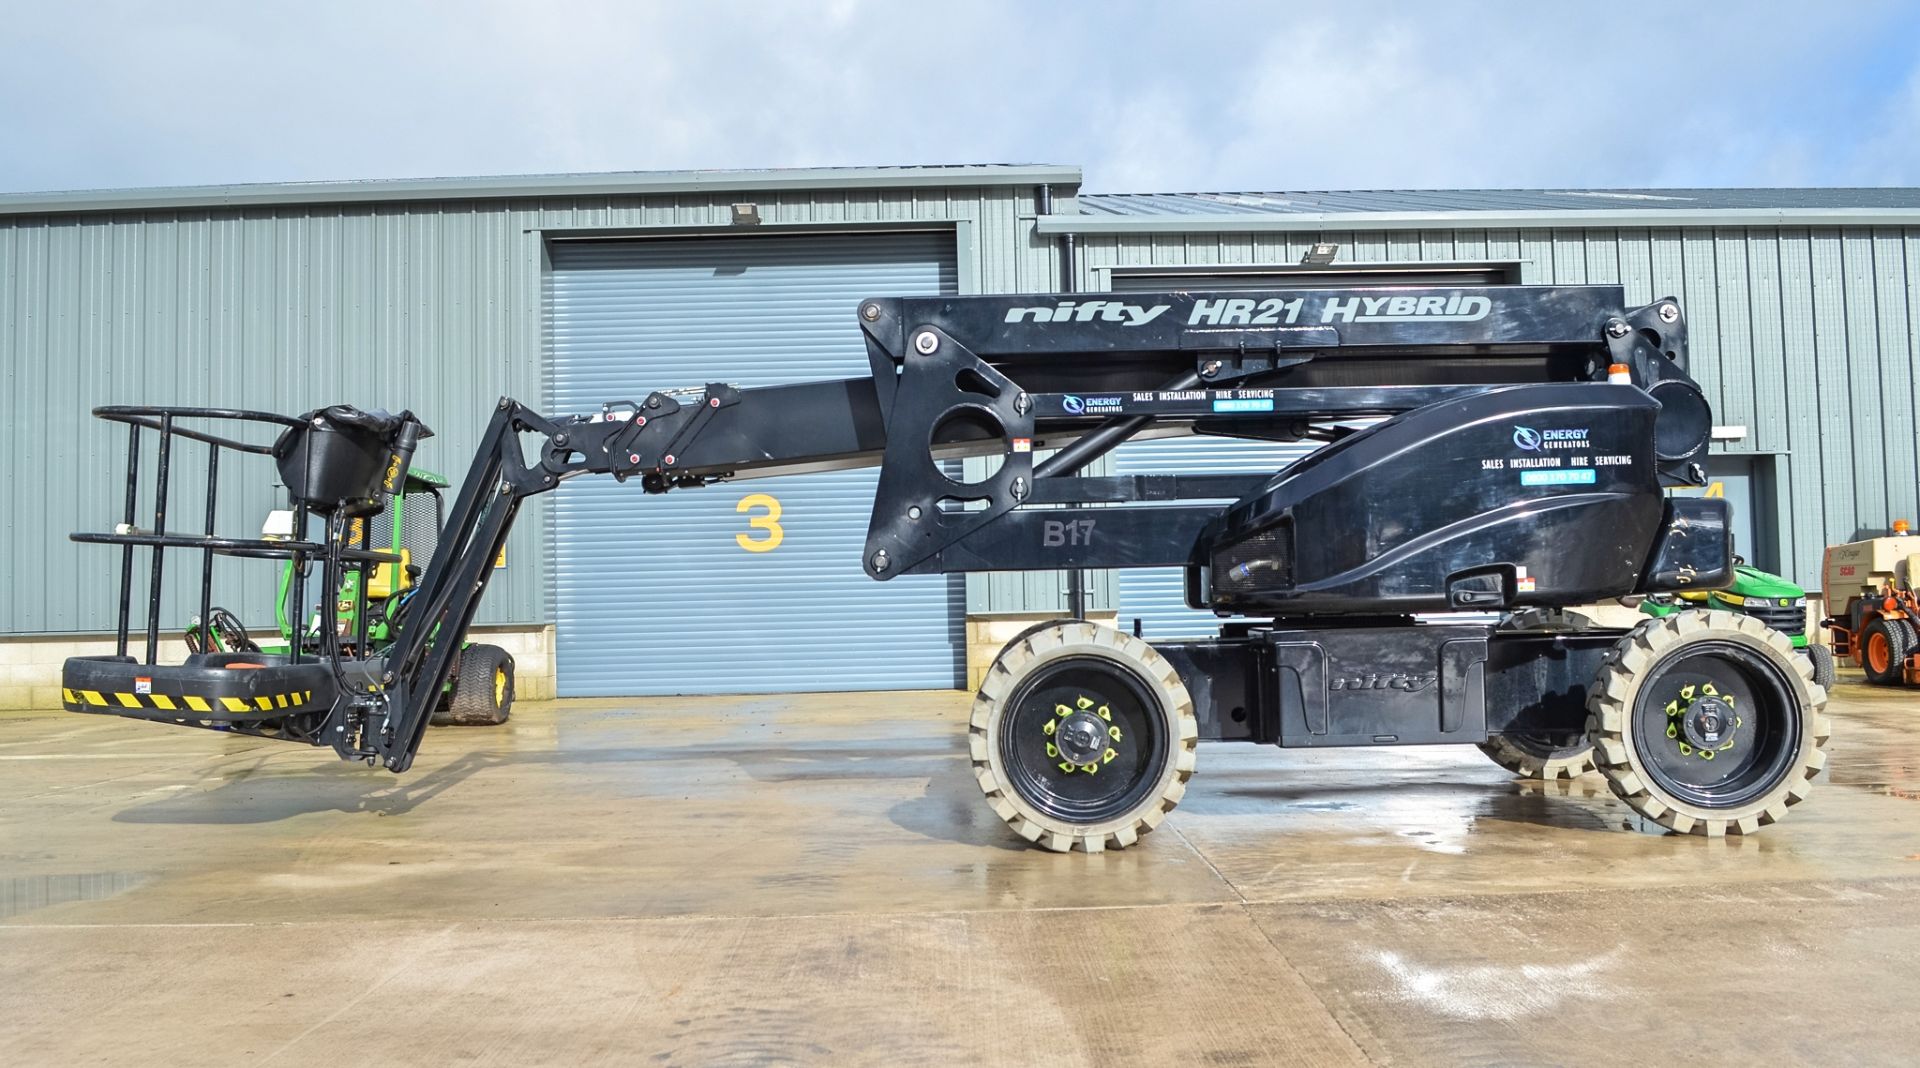 Nifty HR21 Hybrid diesel/battery electric 4x4 rough terrain articulated boom lift access platform - Image 7 of 24